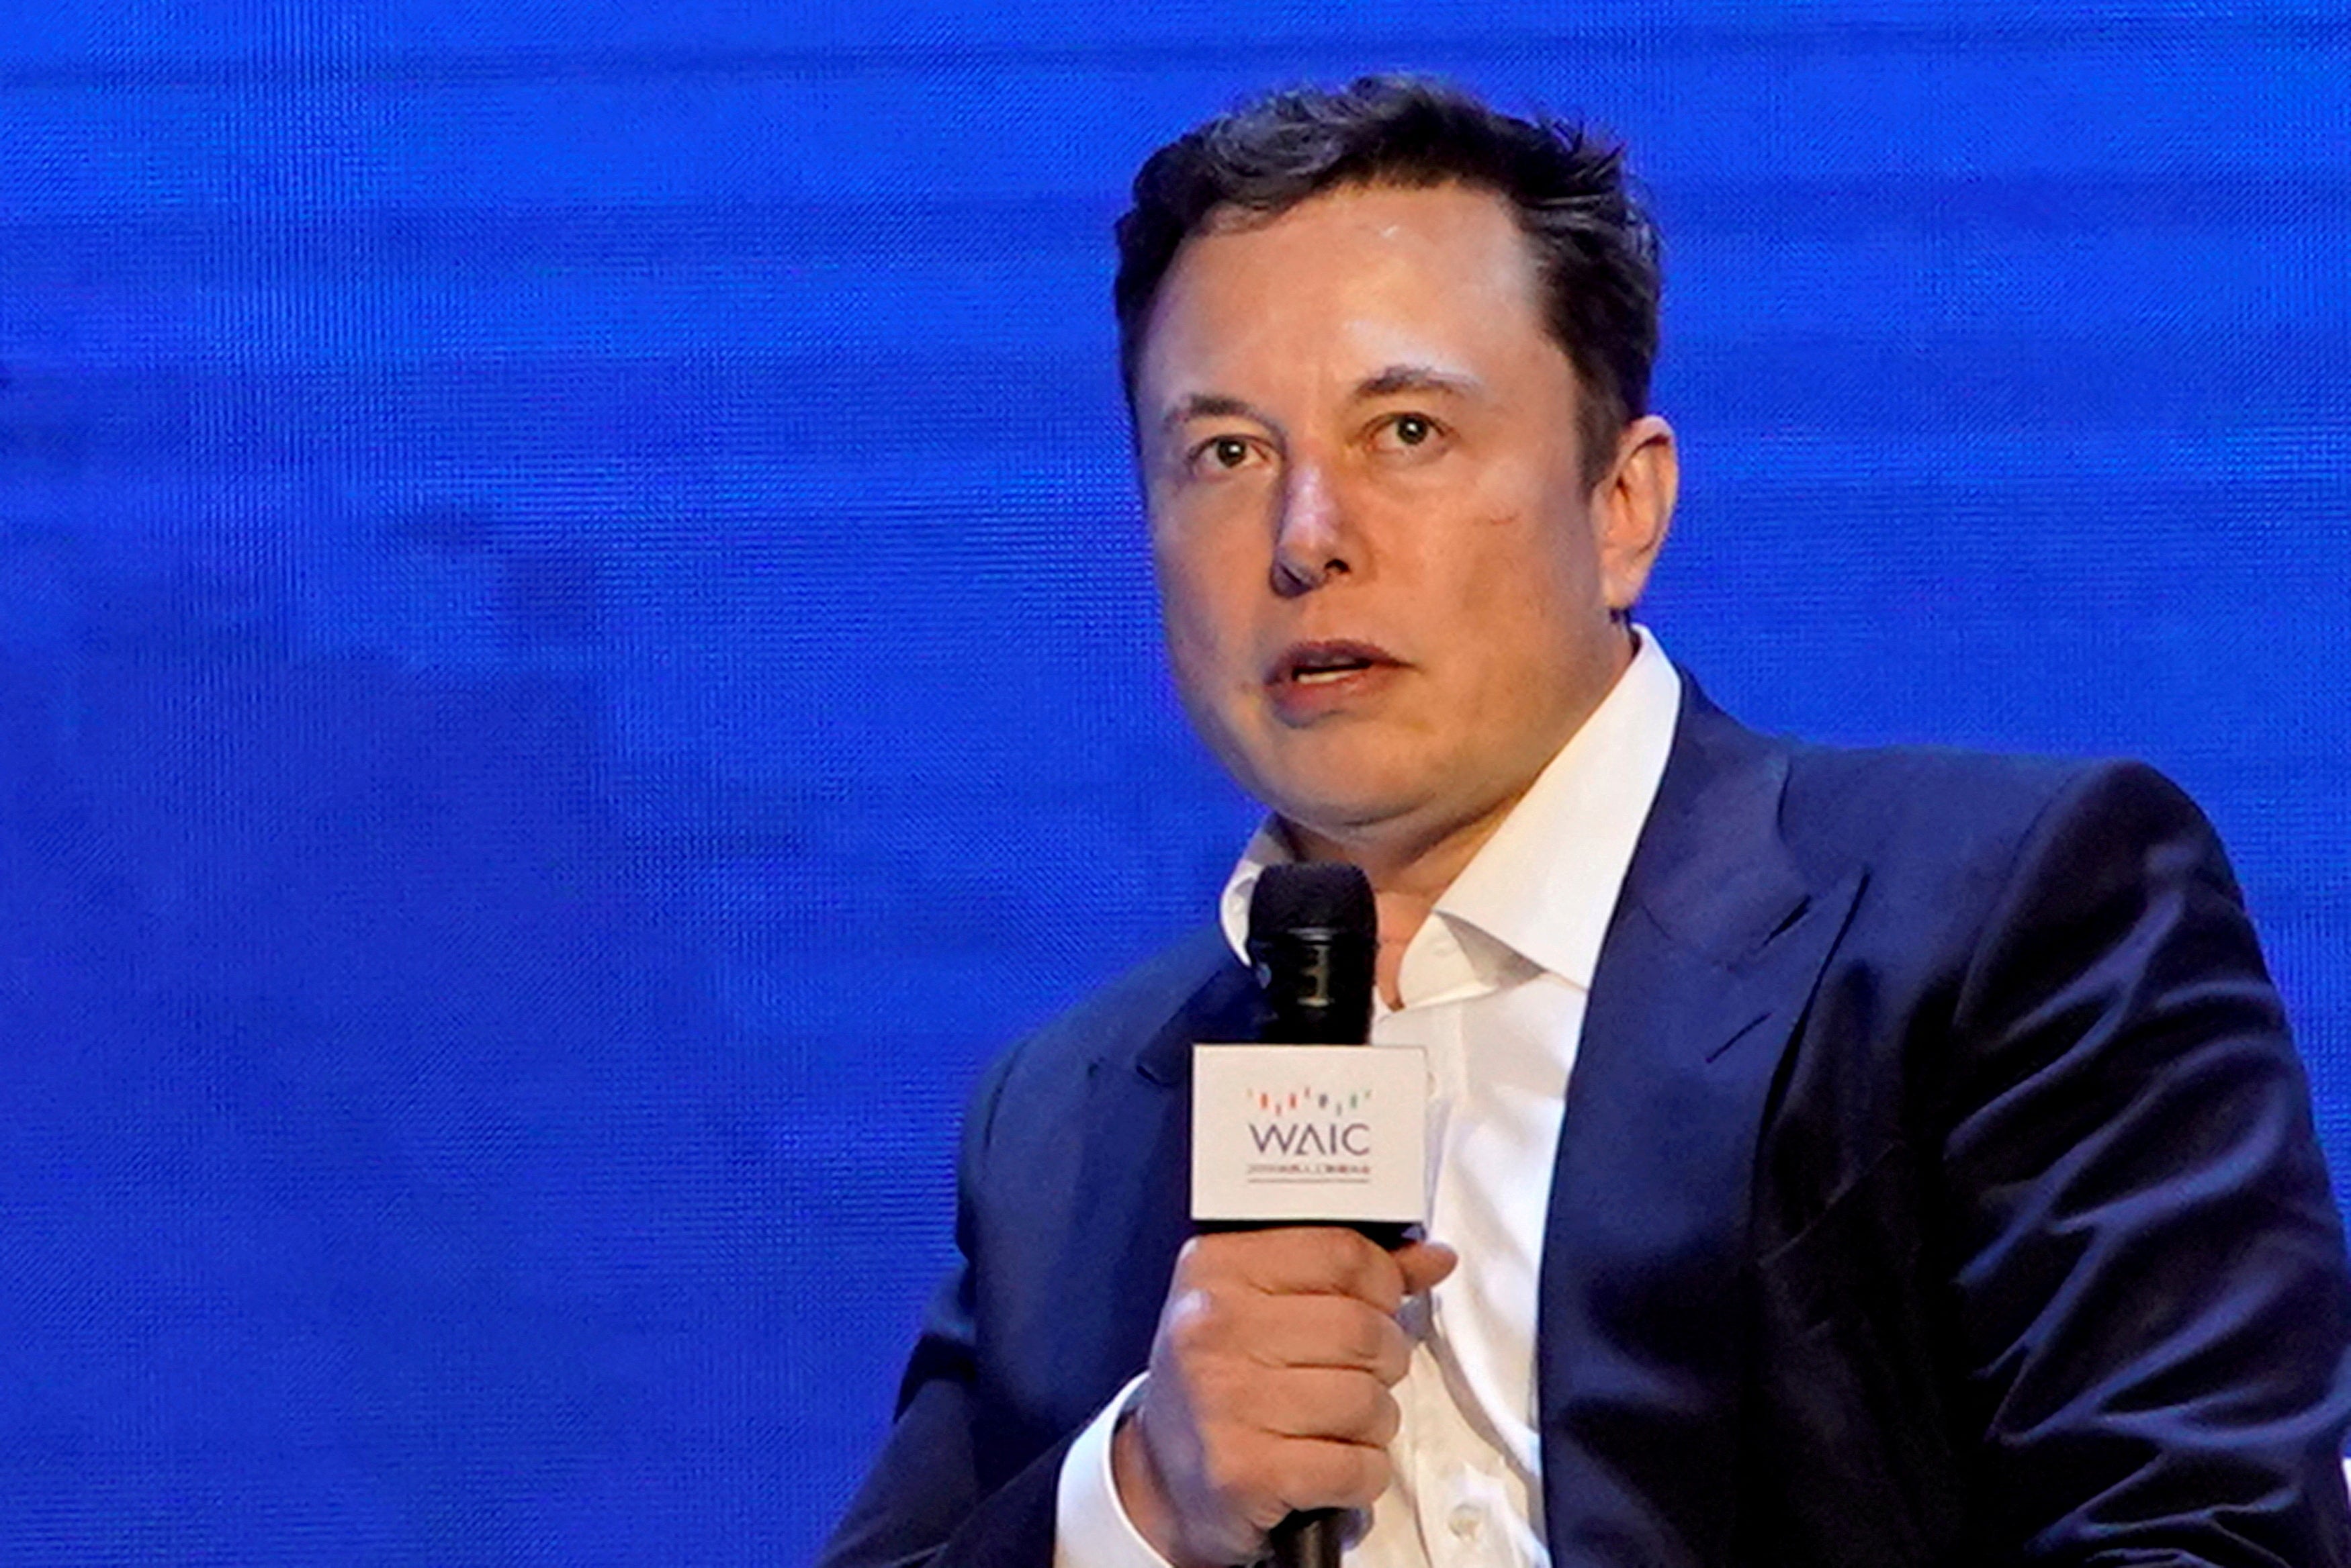 Tesla Inc CEO Elon Musk attends the World Artificial Intelligence Conference (WAIC) in Shanghai, China August 29, 2019. REUTERS/Aly Song/File Photo